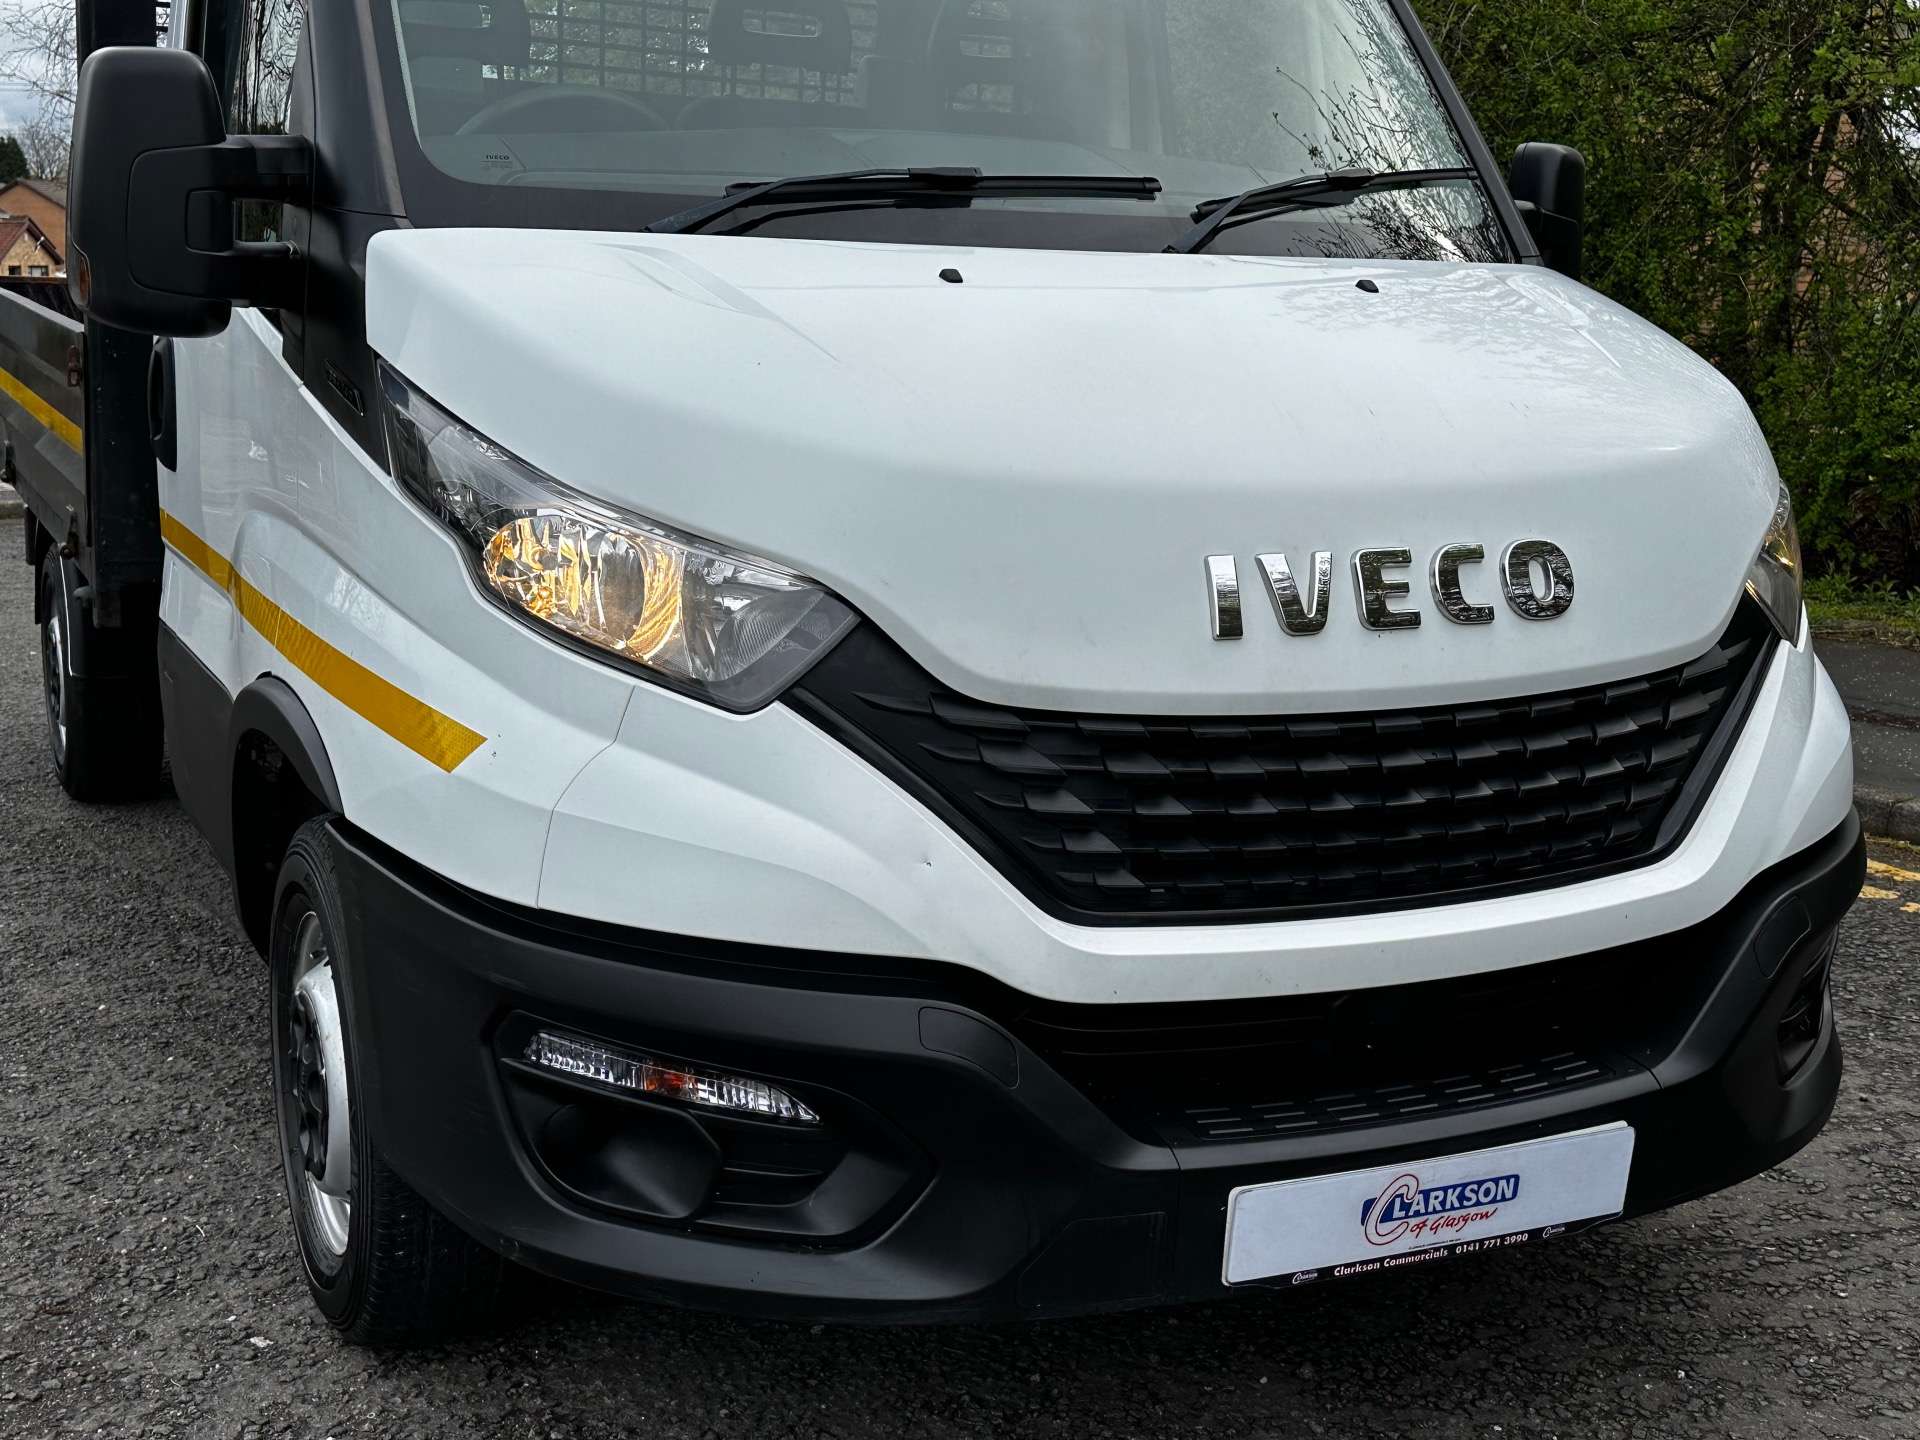 IVECO DAILY 35C CLASS 35C14 Single Cab Tipper 140ps/6 speed #13